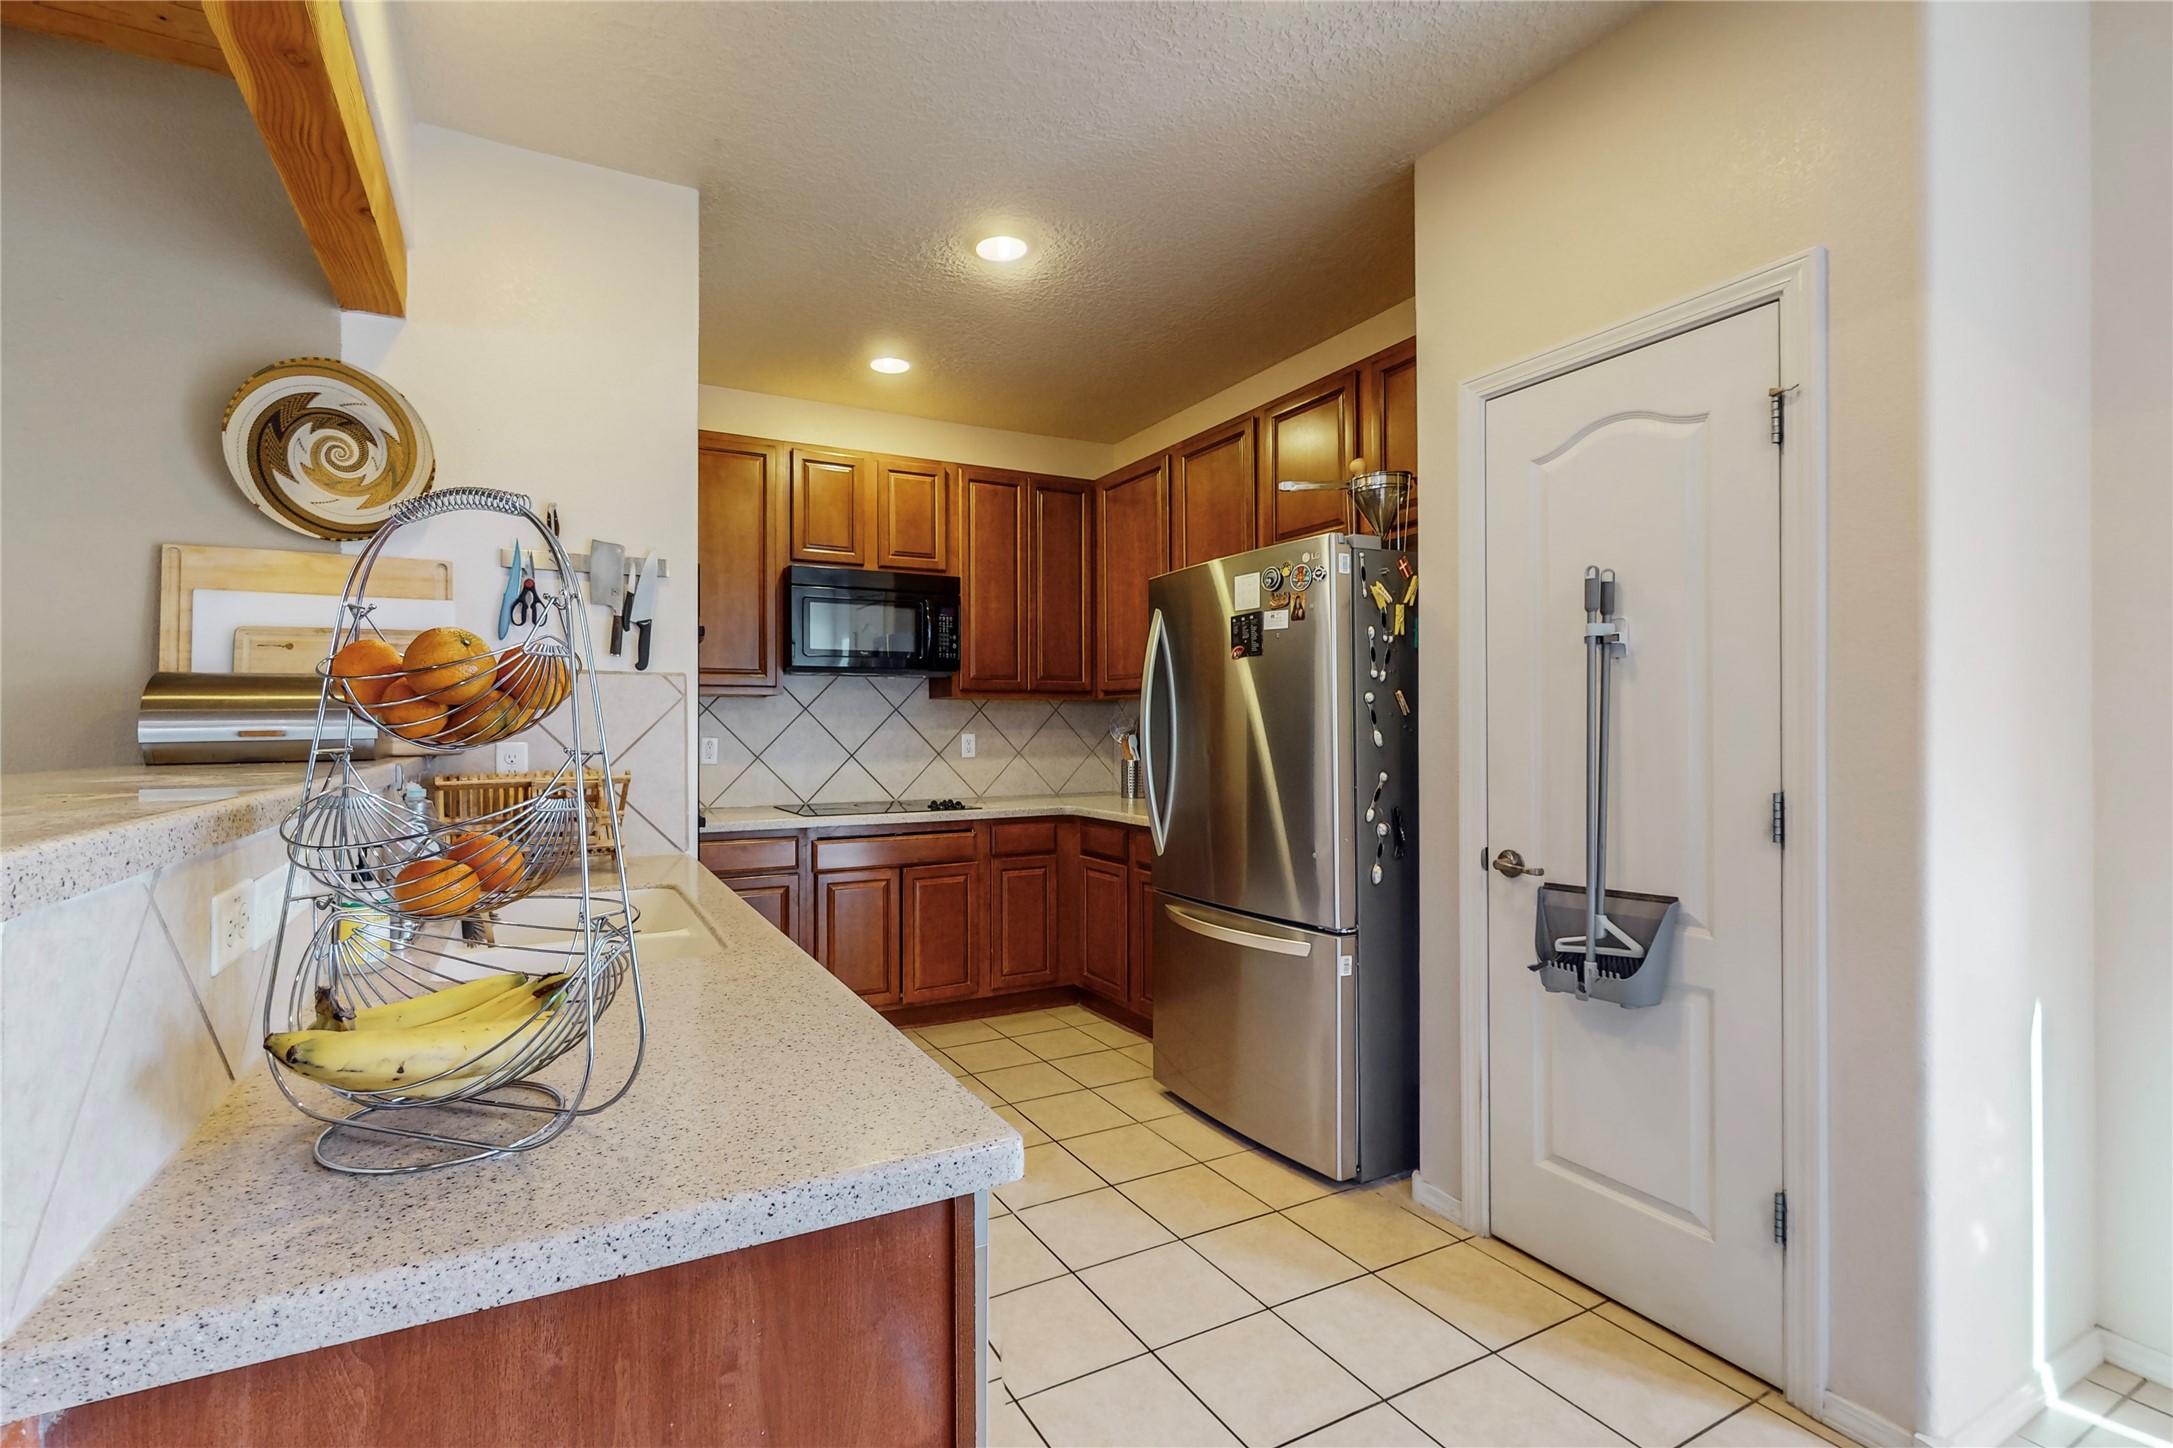 Kitchen with large pantry, double oven, and breakfast bar. The kitchen opens up to the dining and living area